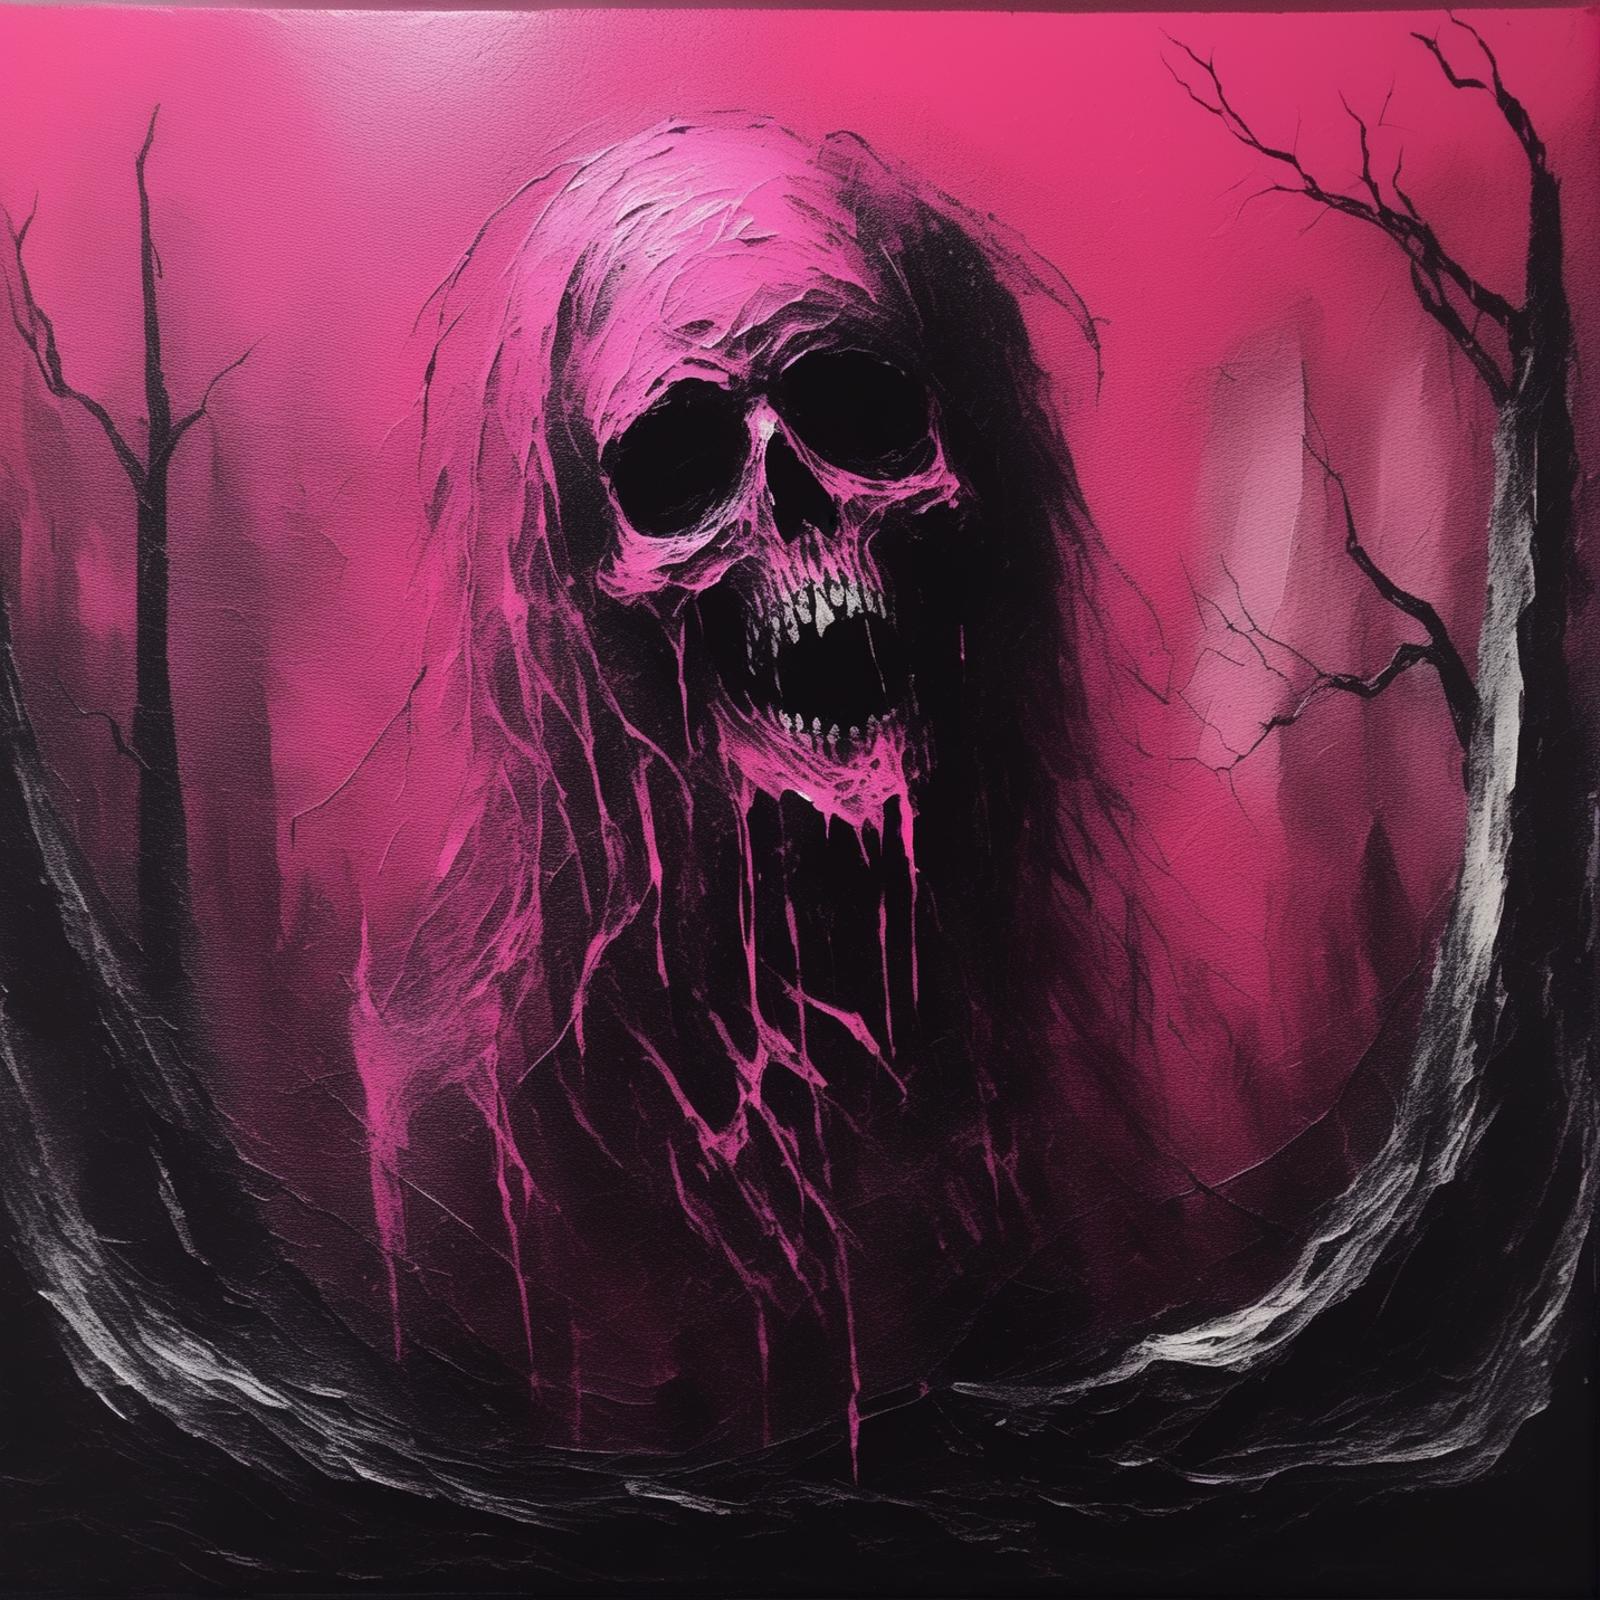 A dark painting of a skeleton with pink background, possibly a skull.